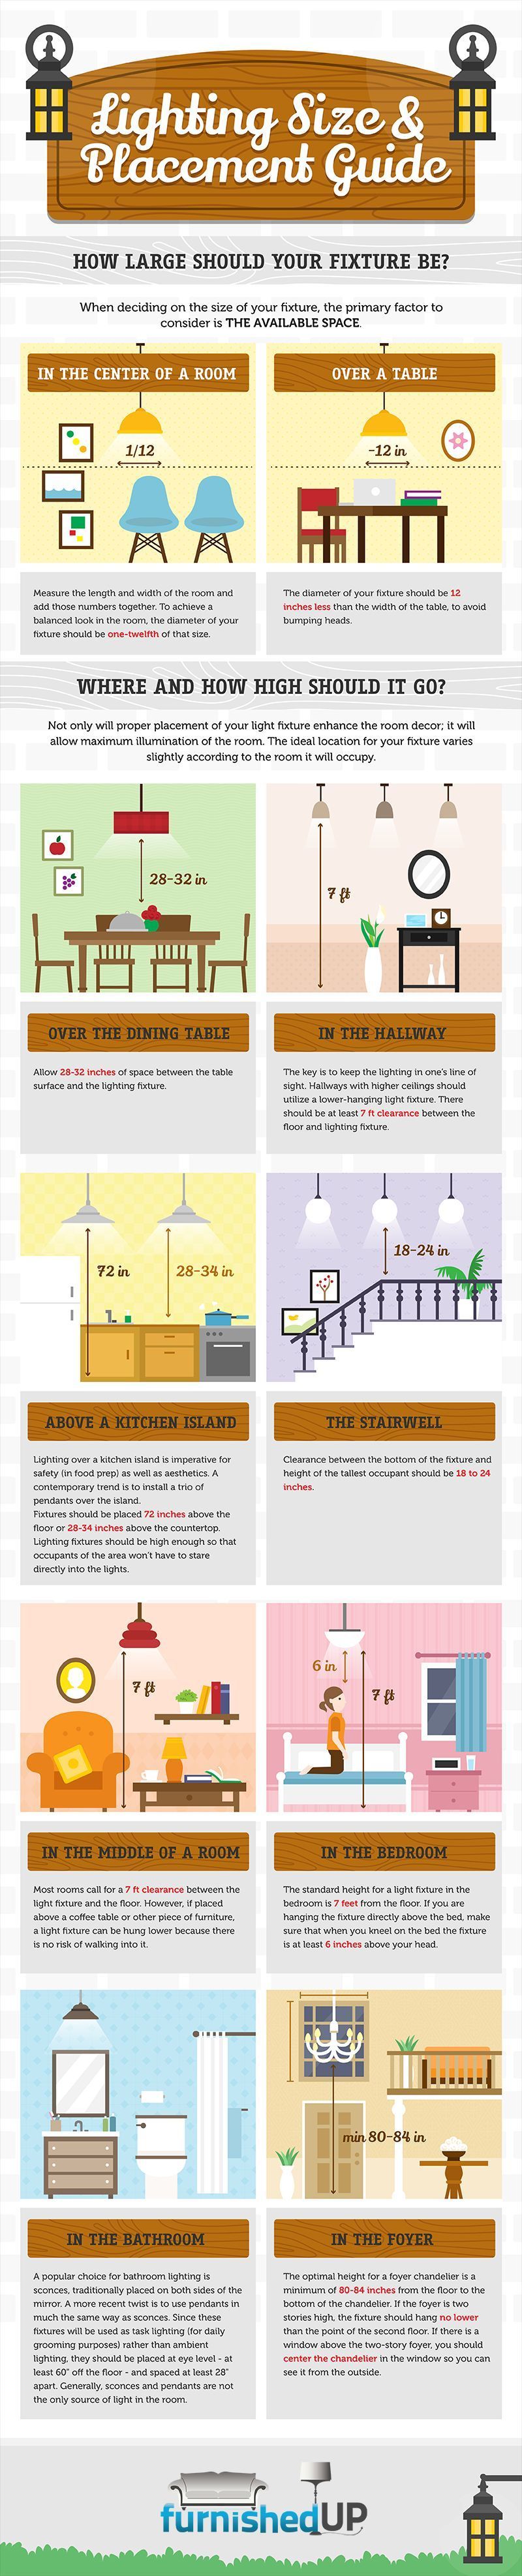 How to hang lighting, a practical guide to measurements. Very good to know for hanging light fixtures.